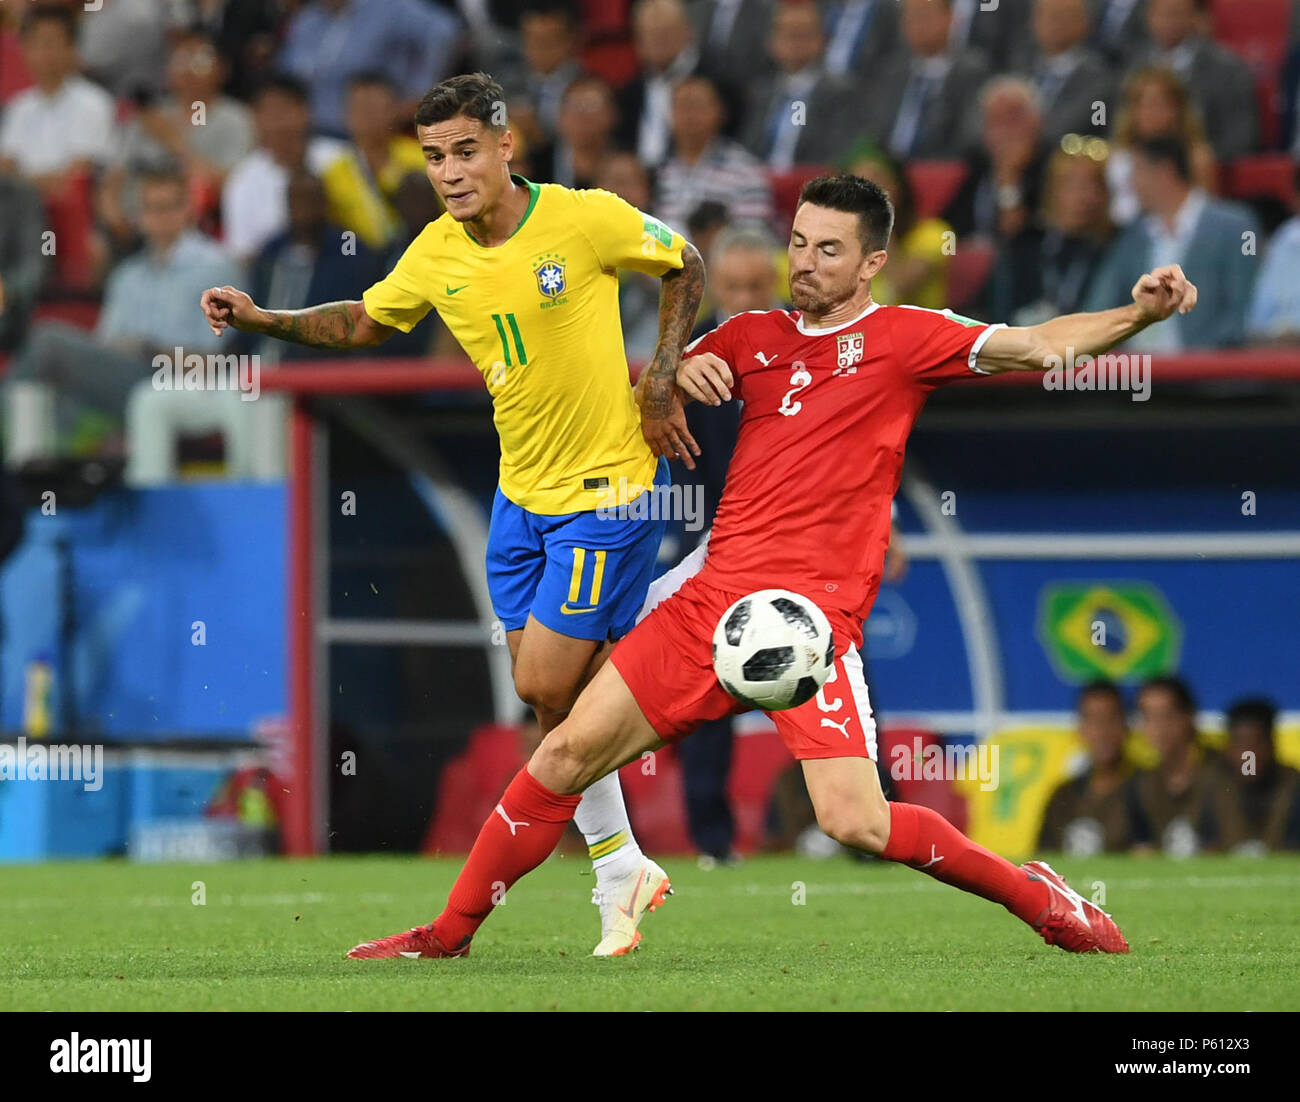 Moscow, Russia. 27th June, 2018. Philippe Coutinho (L) of Brazil vies with Antonio Rukavina of Serbia during the 2018 FIFA World Cup Group E match between Brazil and Serbia in Moscow, Russia, June 27, 2018. Credit: Du Yu/Xinhua/Alamy Live News Stock Photo